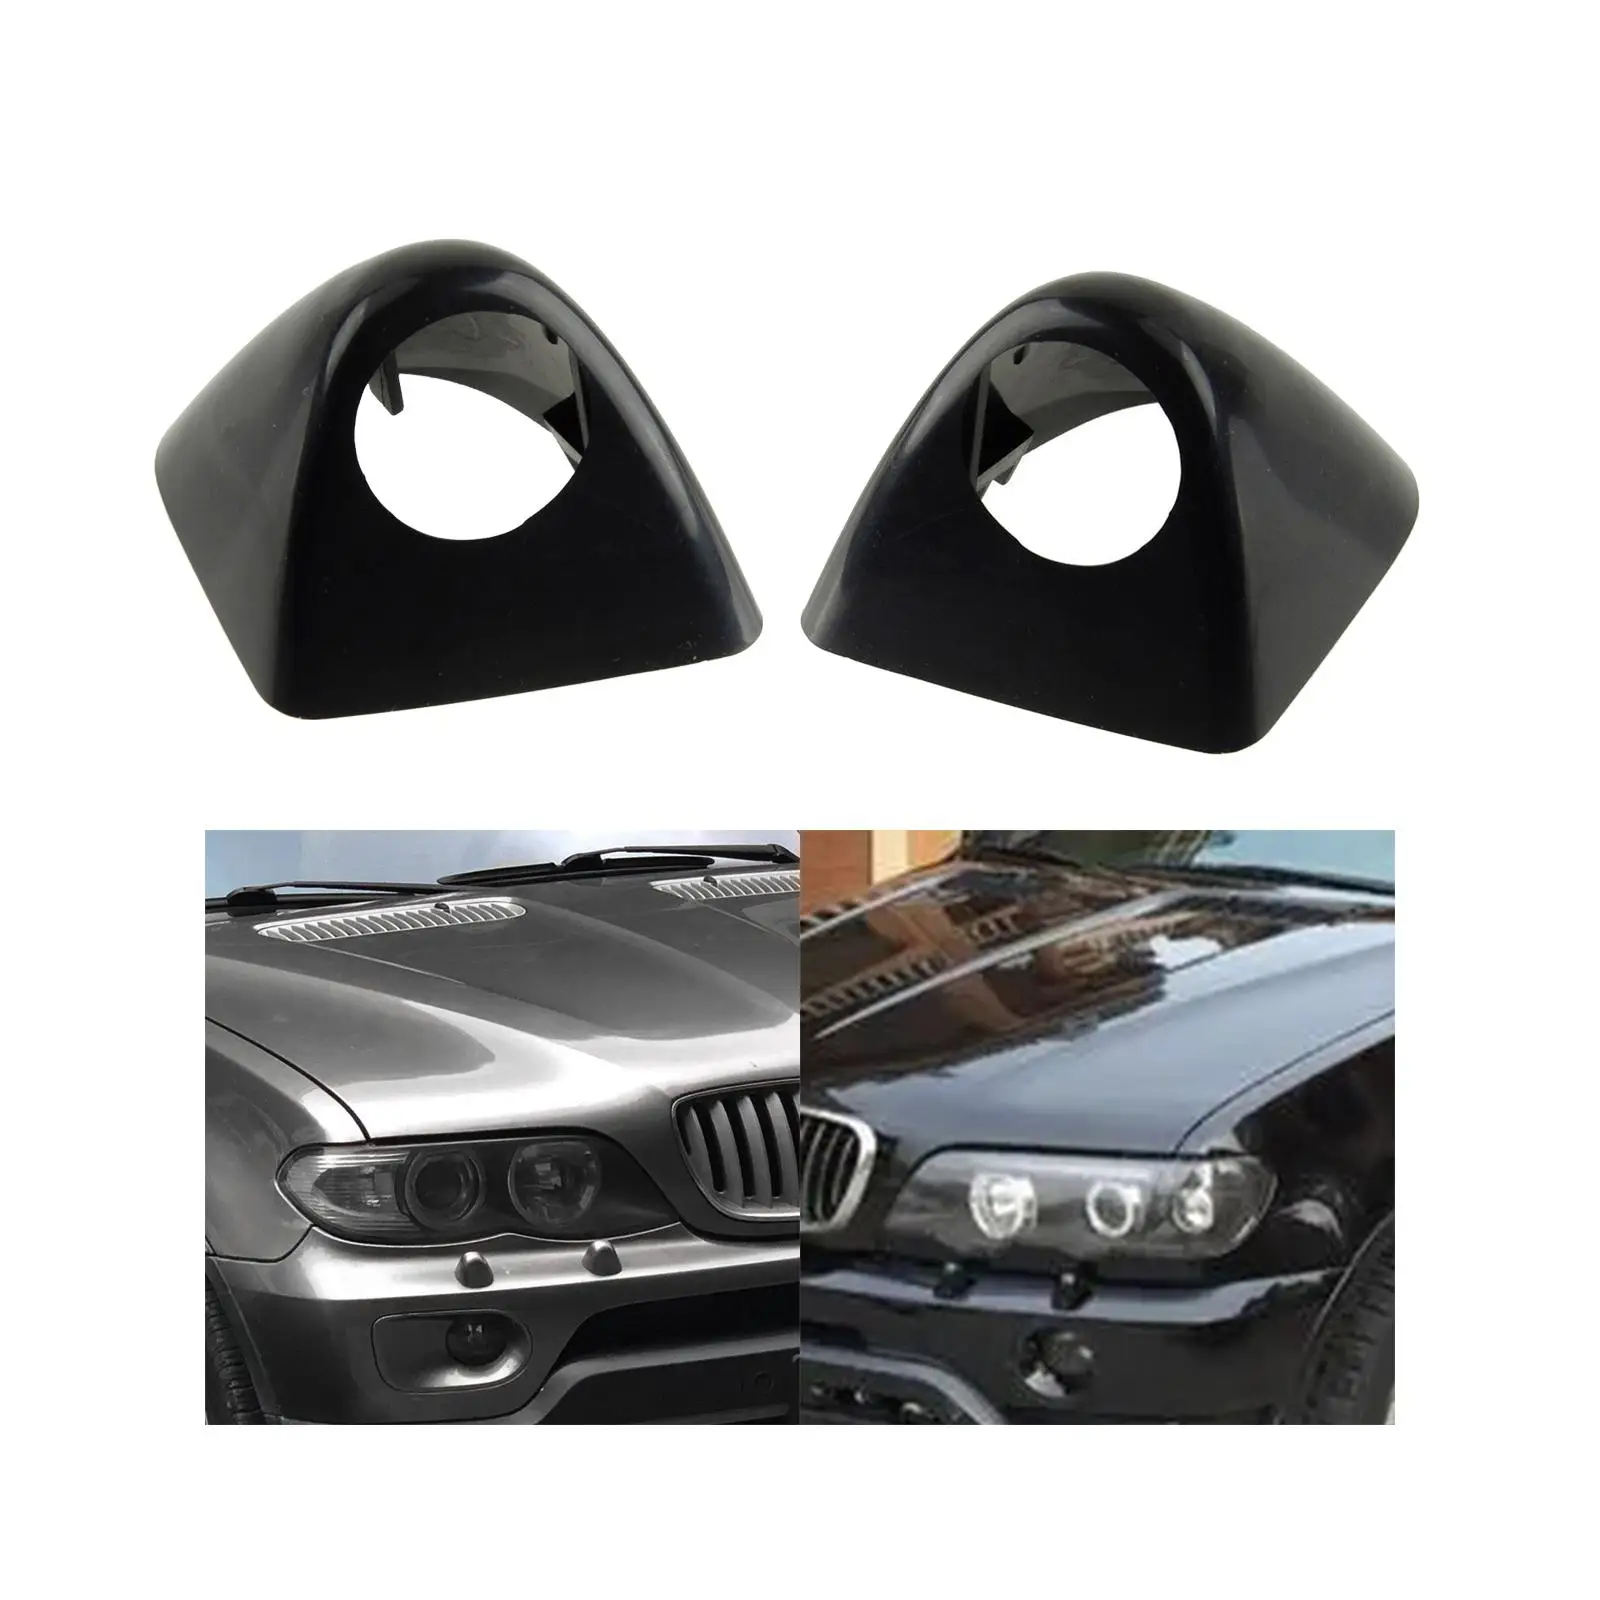 Replacement Headlight Washer Cover Sturdy for bmw E53 x5 Accessories